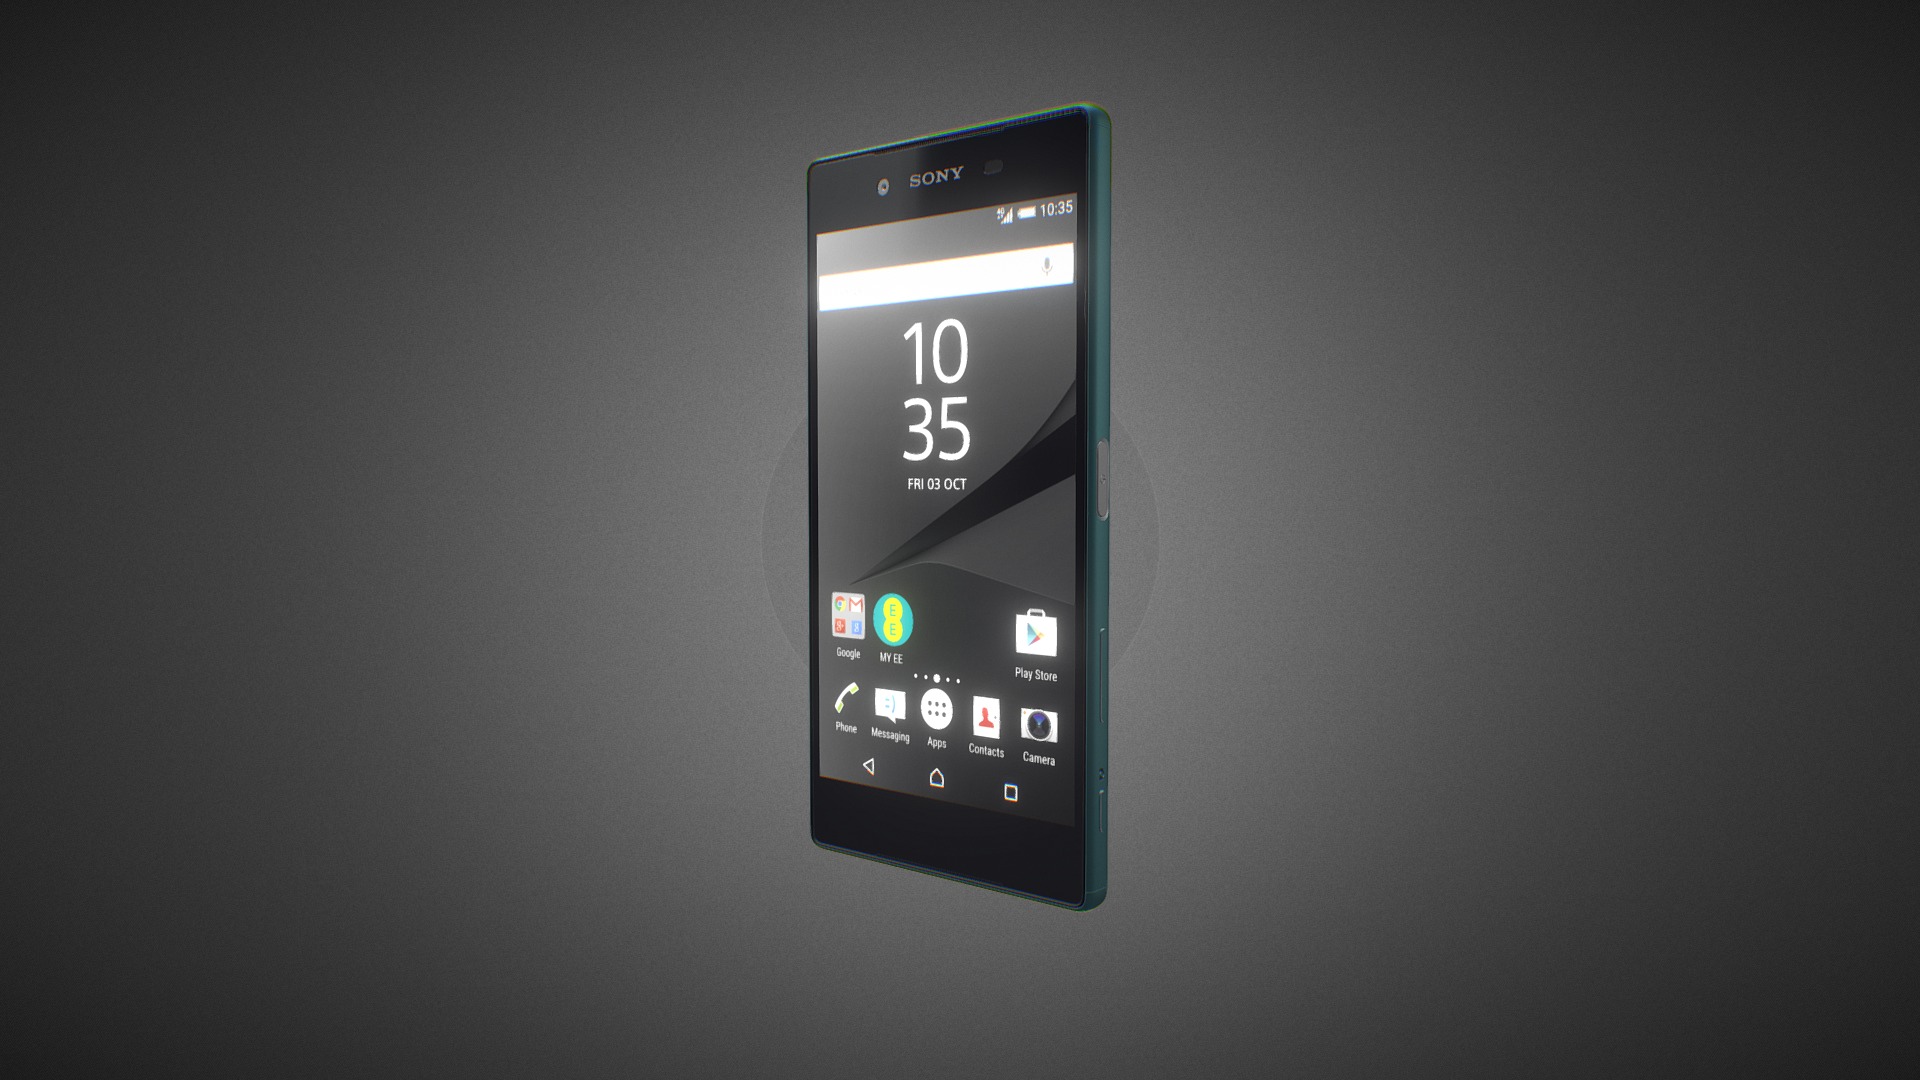 3D model Sony Xperia Z5 for Element 3D - This is a 3D model of the Sony Xperia Z5 for Element 3D. The 3D model is about a smart phone on a table.